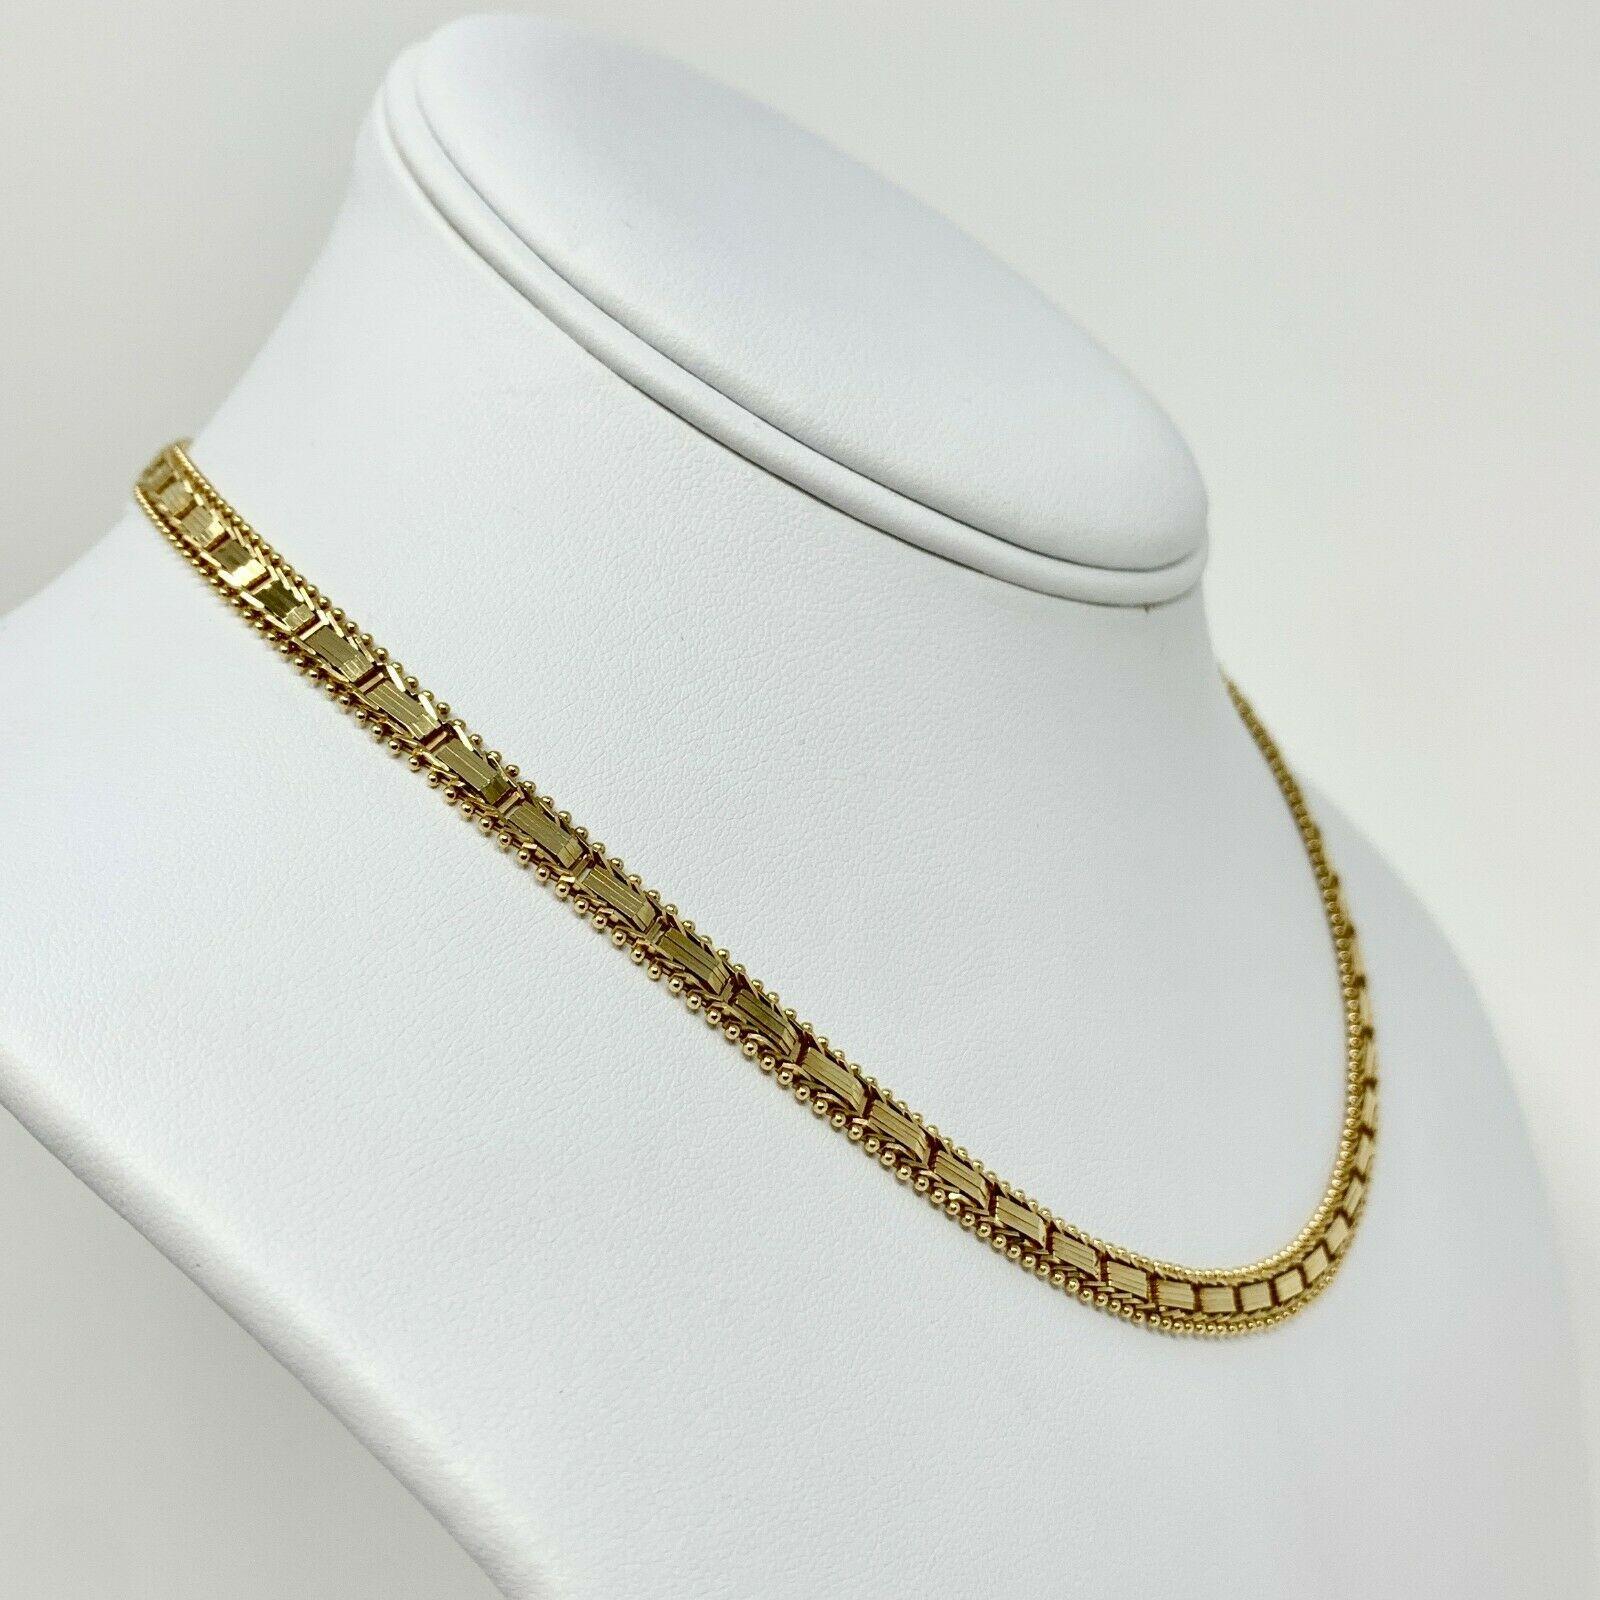 14k Yellow Gold Fancy Riccio Style Collar Link Chain Necklace 16 Inches

Condition:  Excellent (Professionally Cleaned and Polished)
Metal:  14k Gold (Professionally Tested)
Weight:  21.3g
Length:  16 Inches
Width:  5.5mm
Closure:  Box Tab Insert